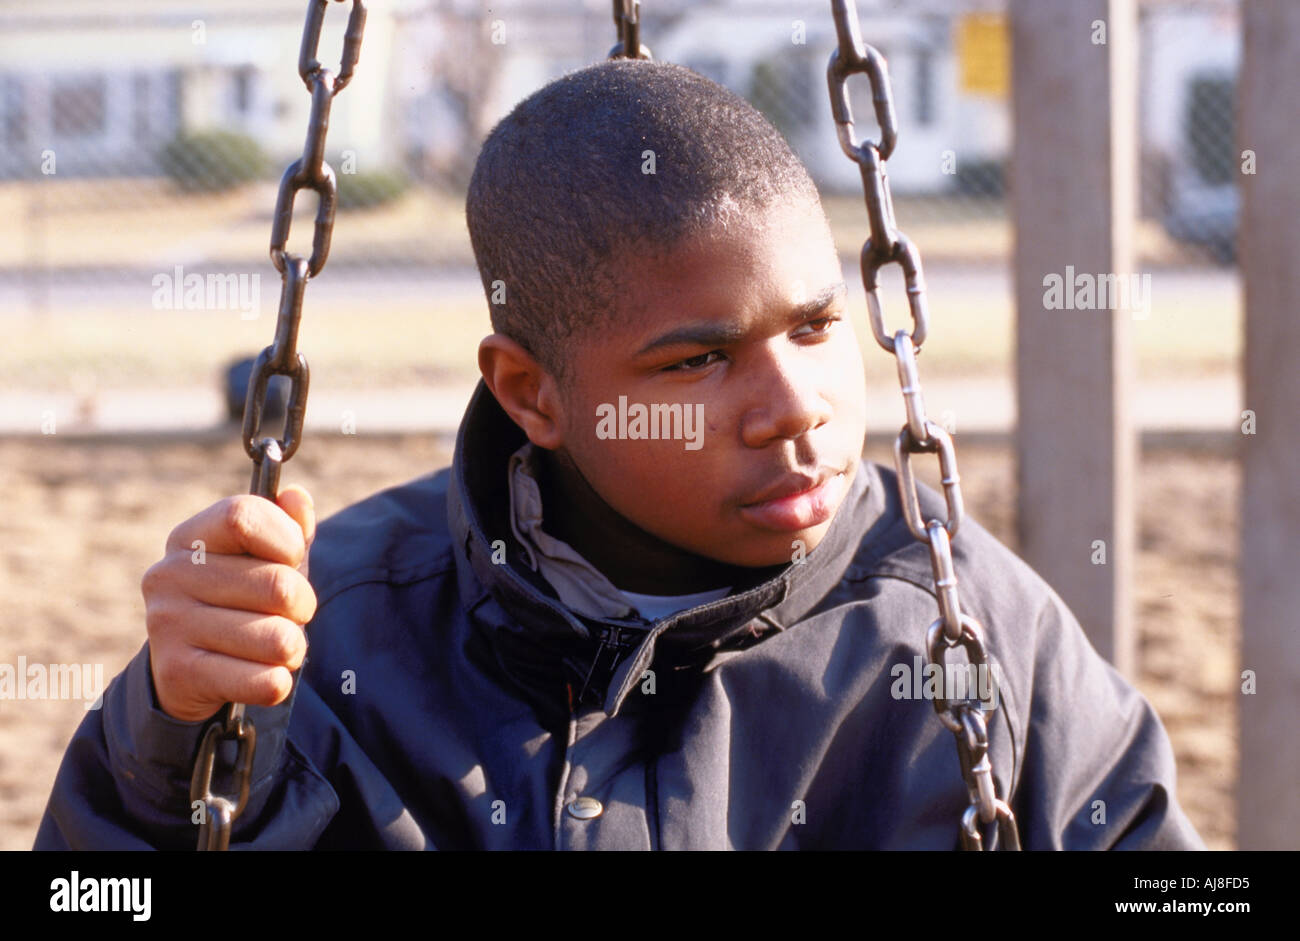 African American teen age 14 looking angry  sitting on a chain swing. St Paul Minnesota USA Stock Photo